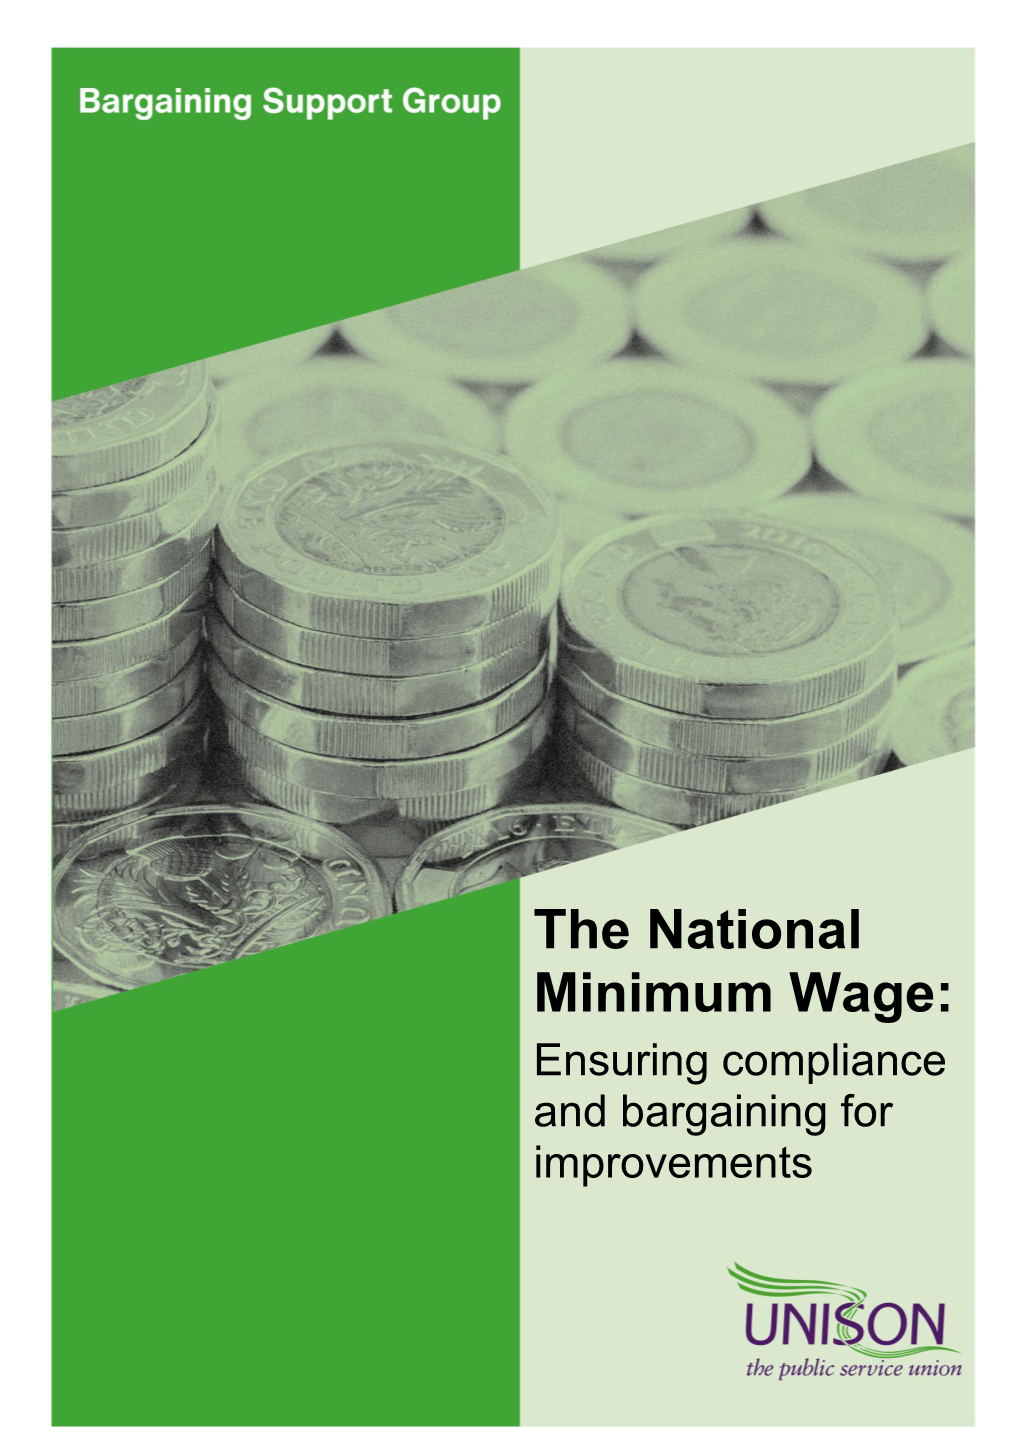 The National Minimum Wage: Ensuring Compliance and Bargaining for Improvements